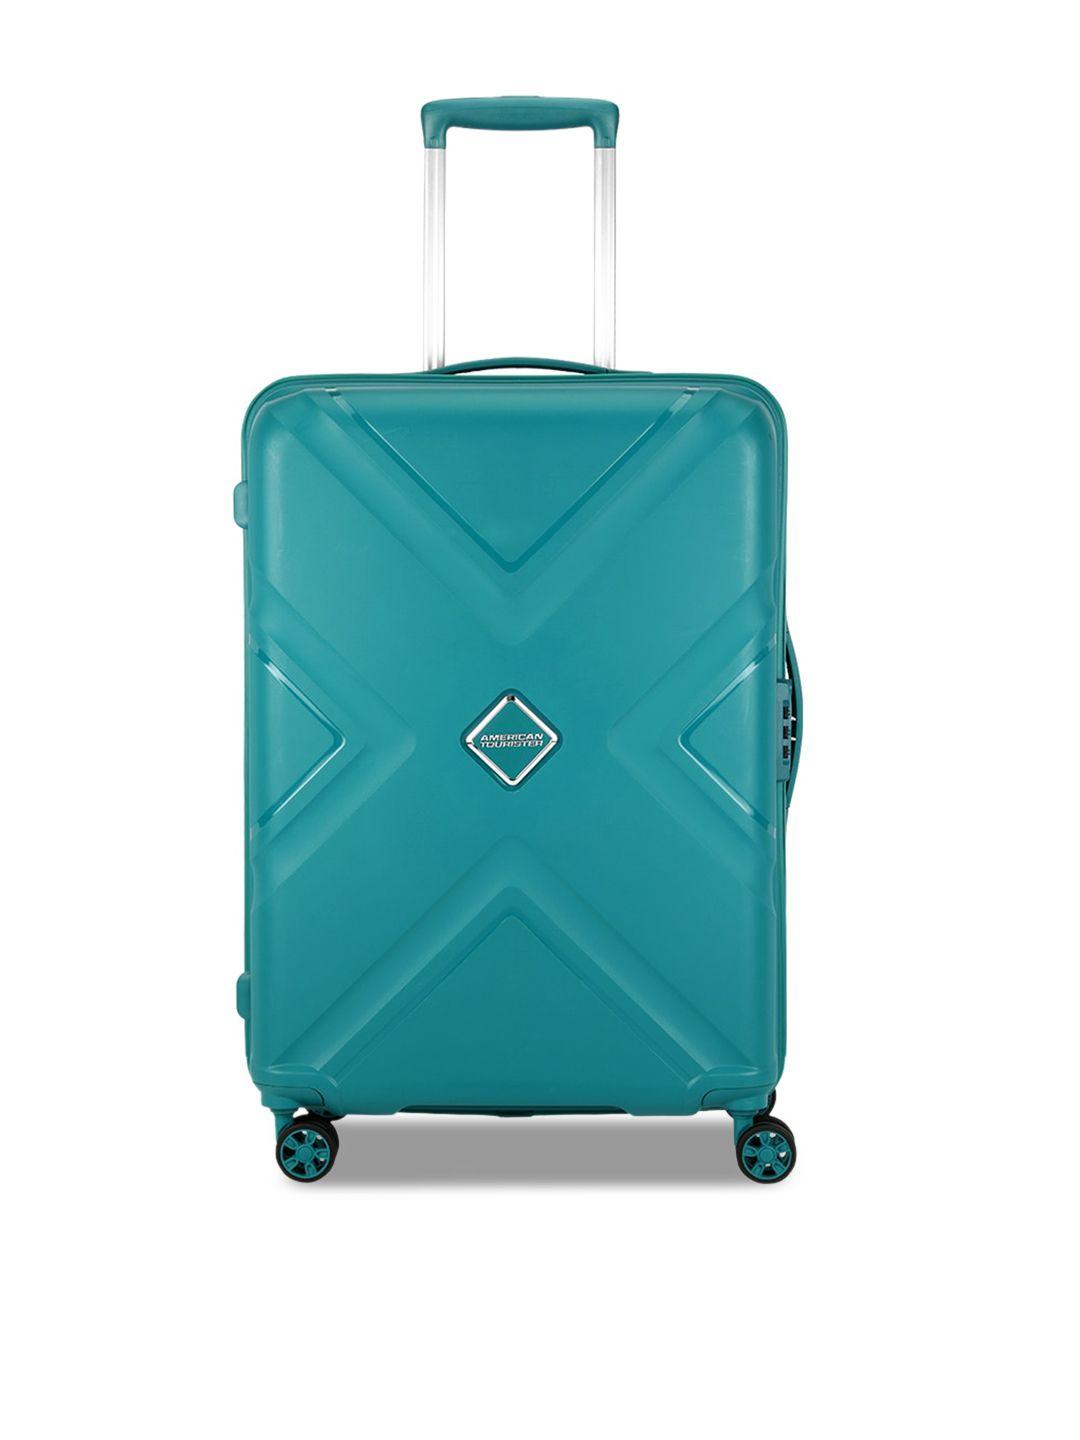 american tourister green solid hard-sided medium trolley suitcase